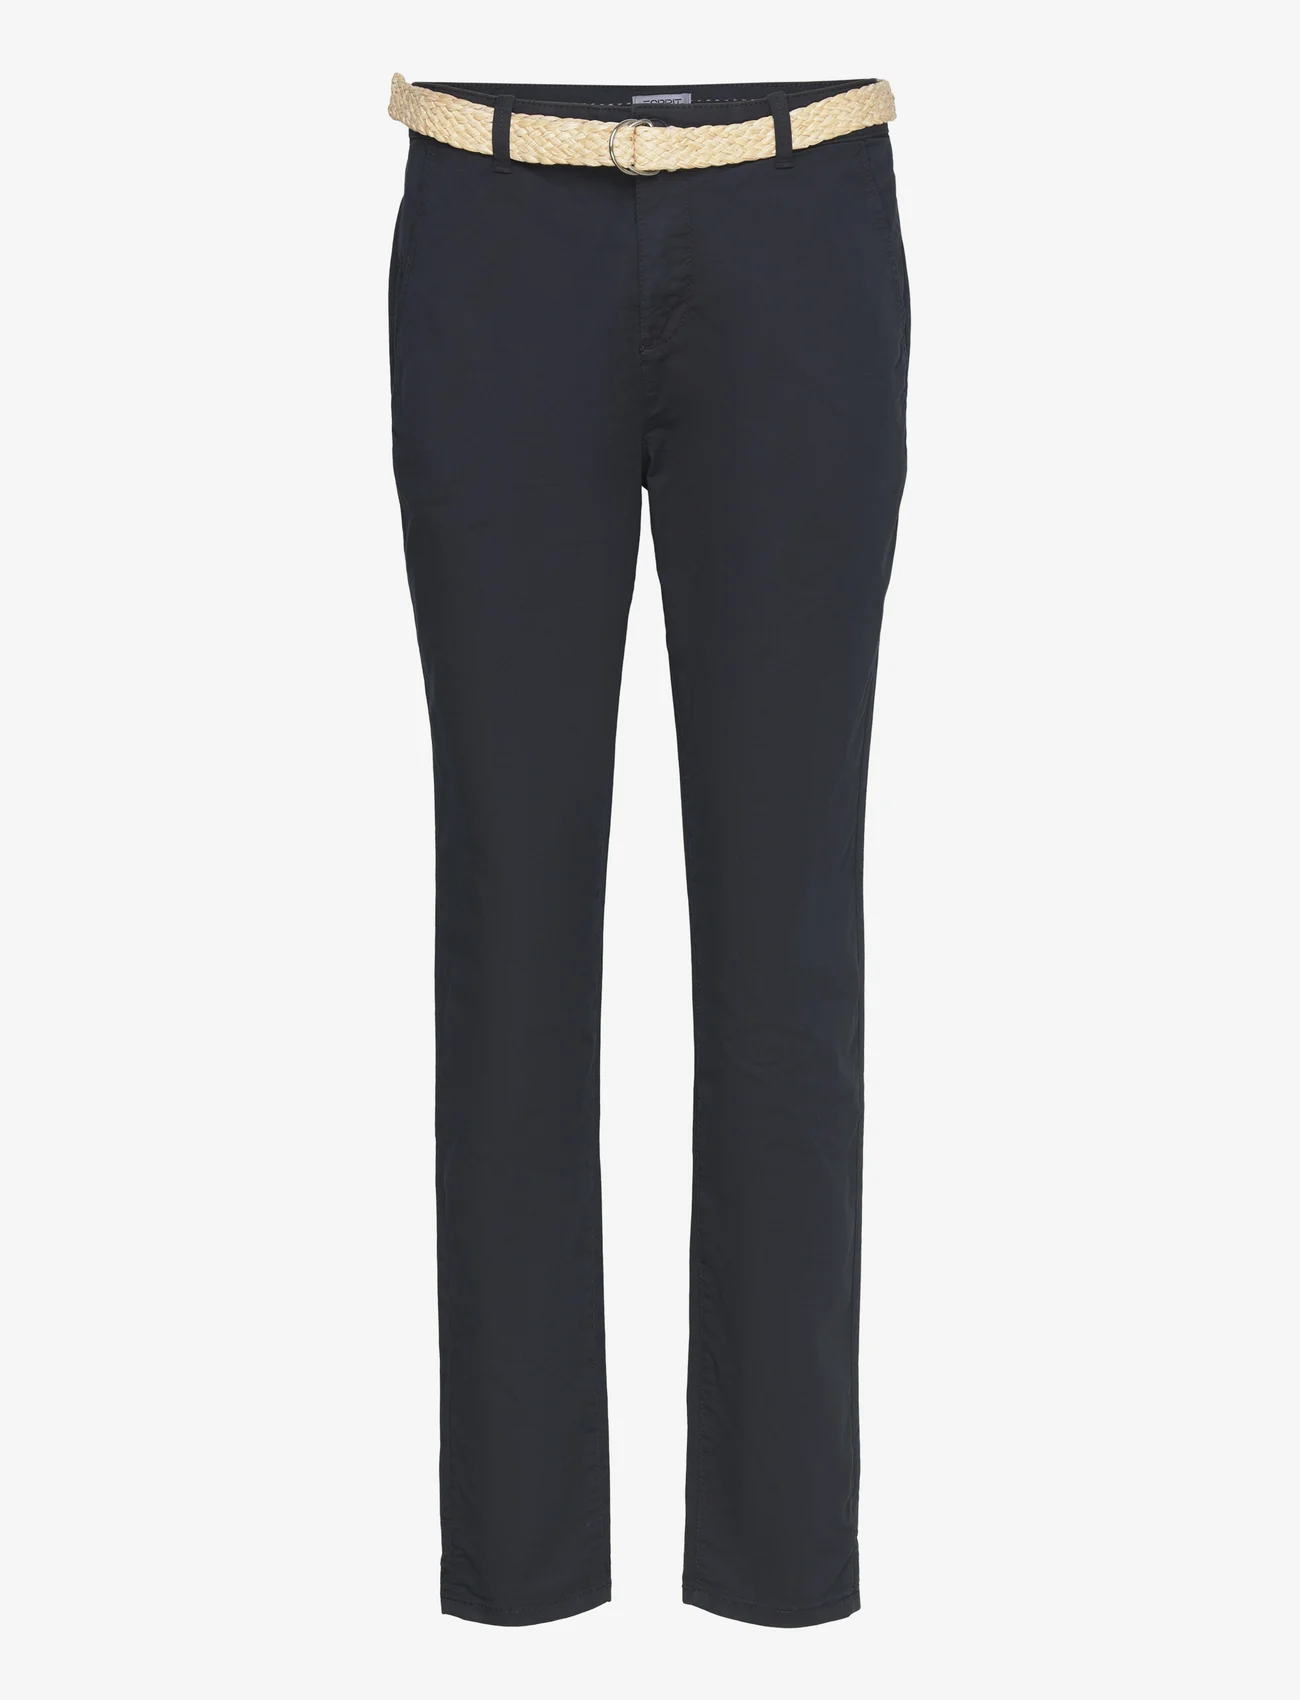 Esprit Casual - Cropped chinos - chinos - navy - 0